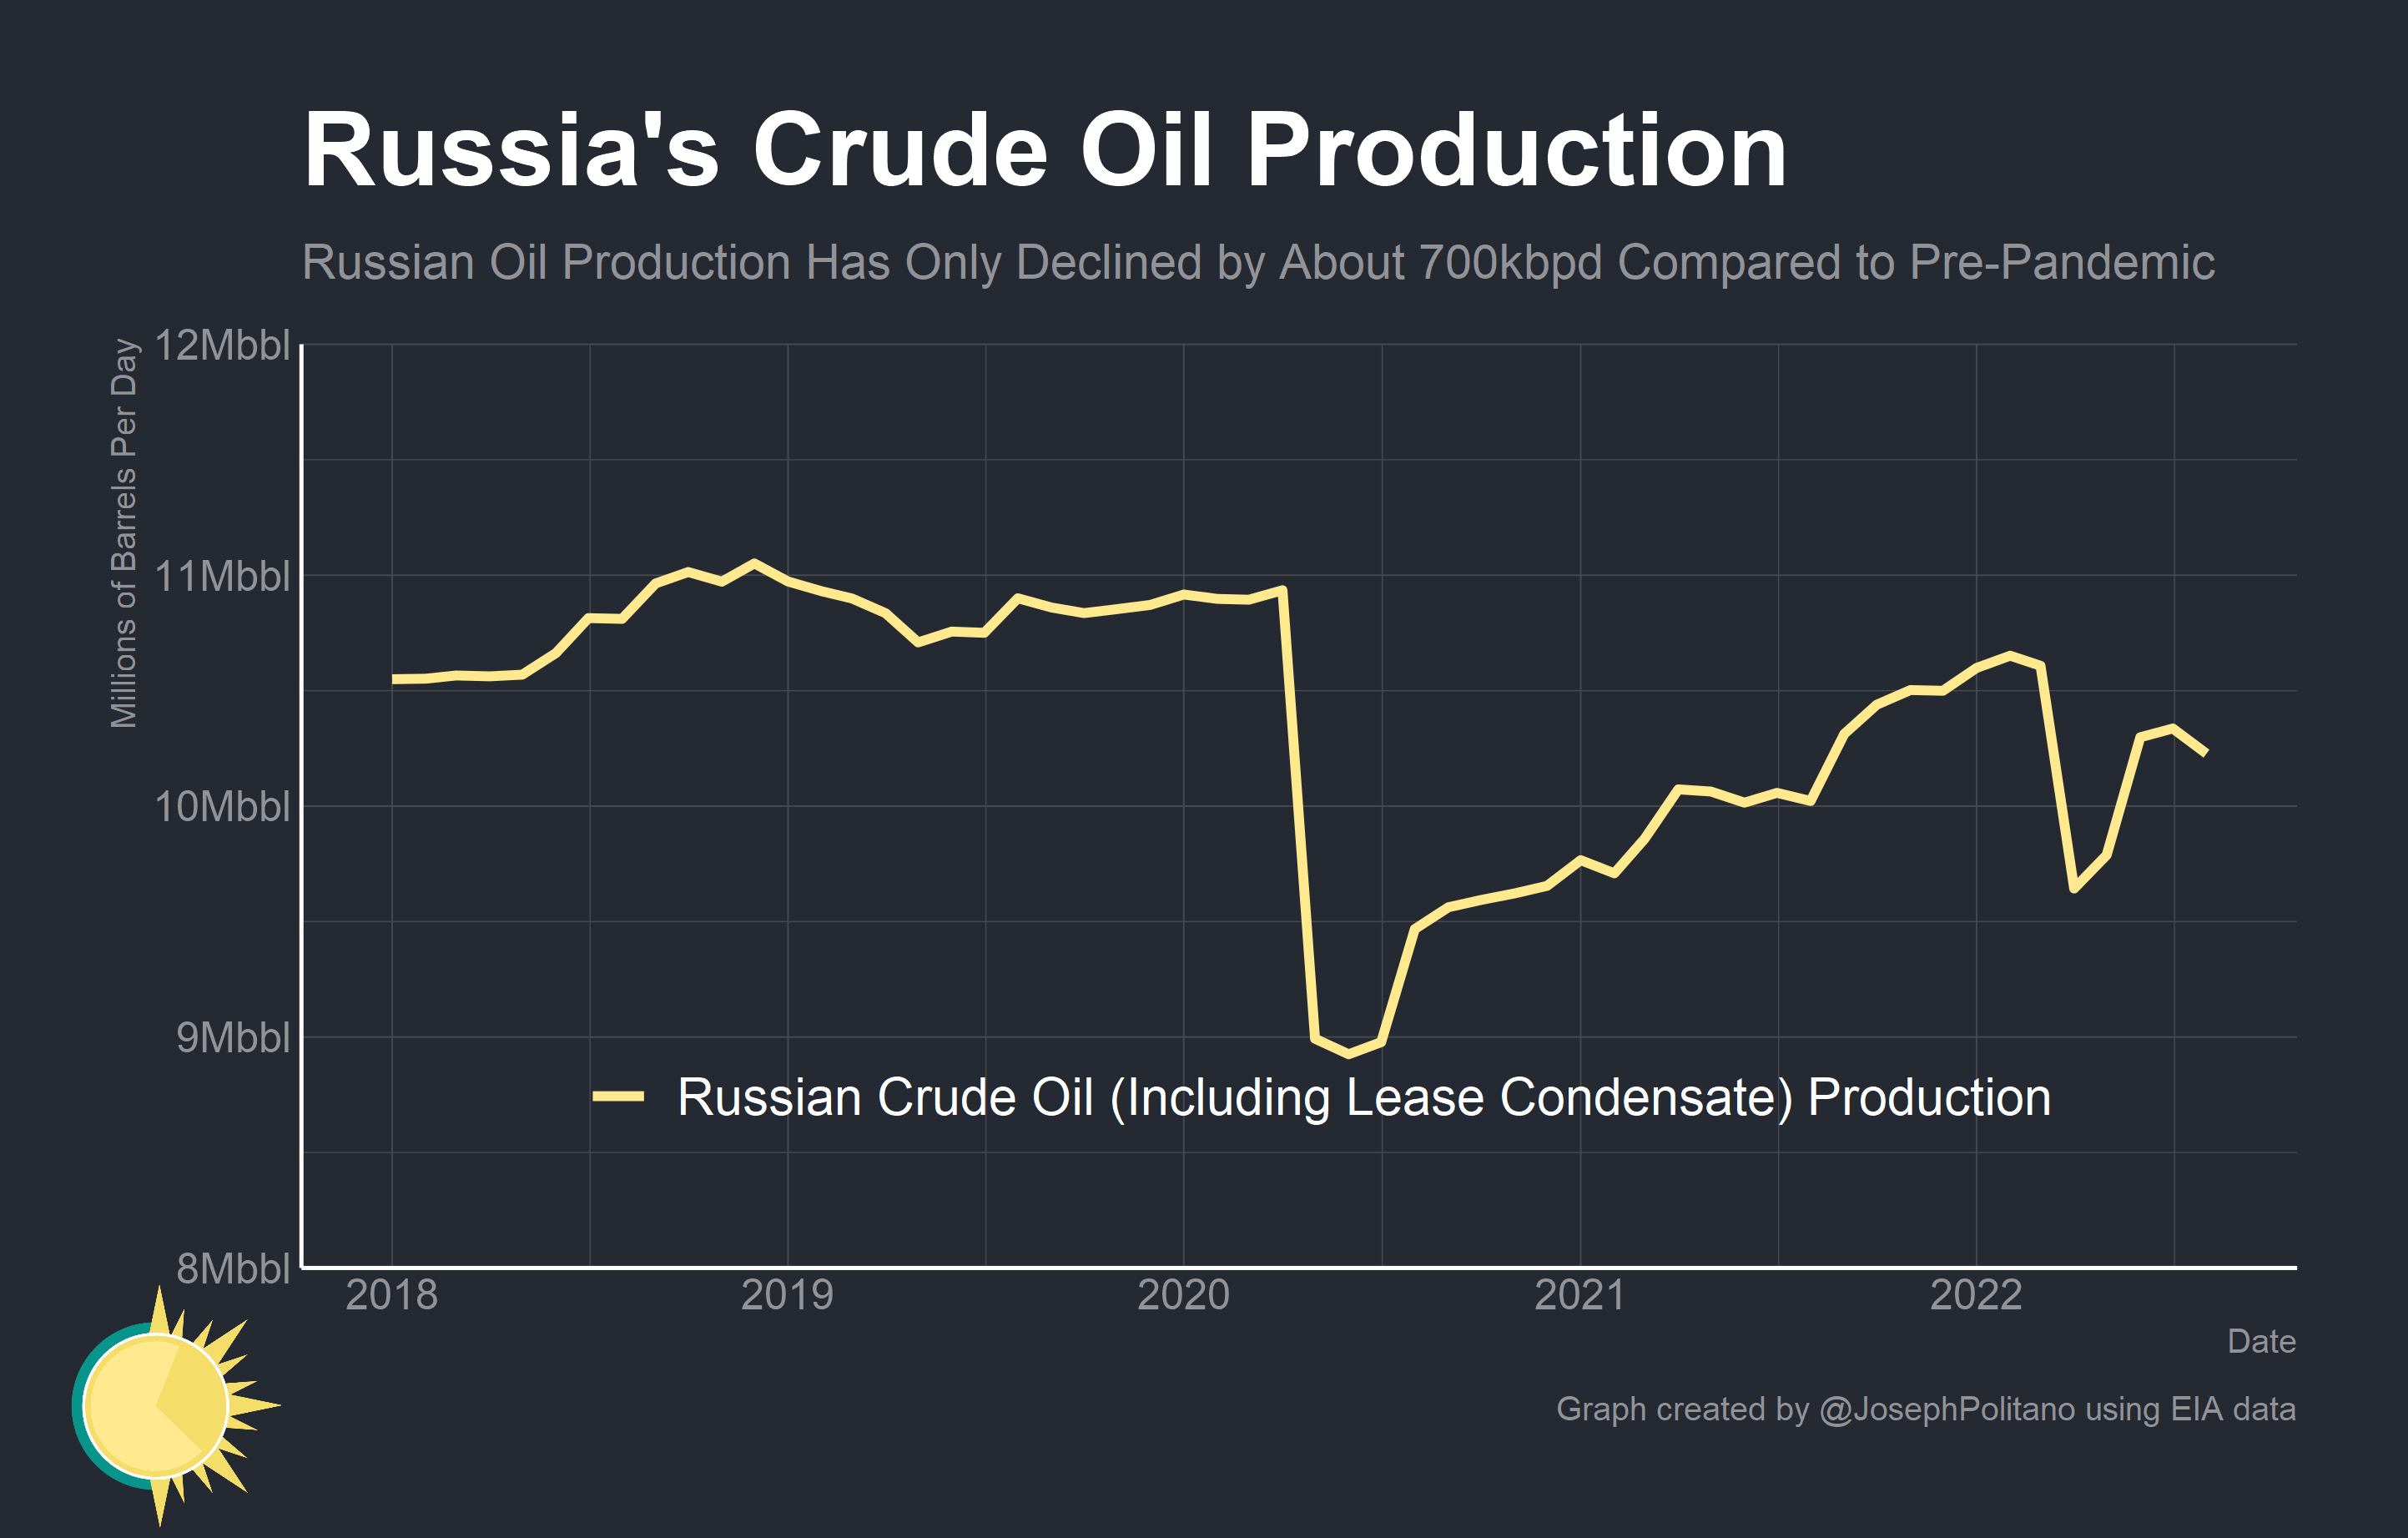 Where is Russian Oil Going? by Joseph Politano